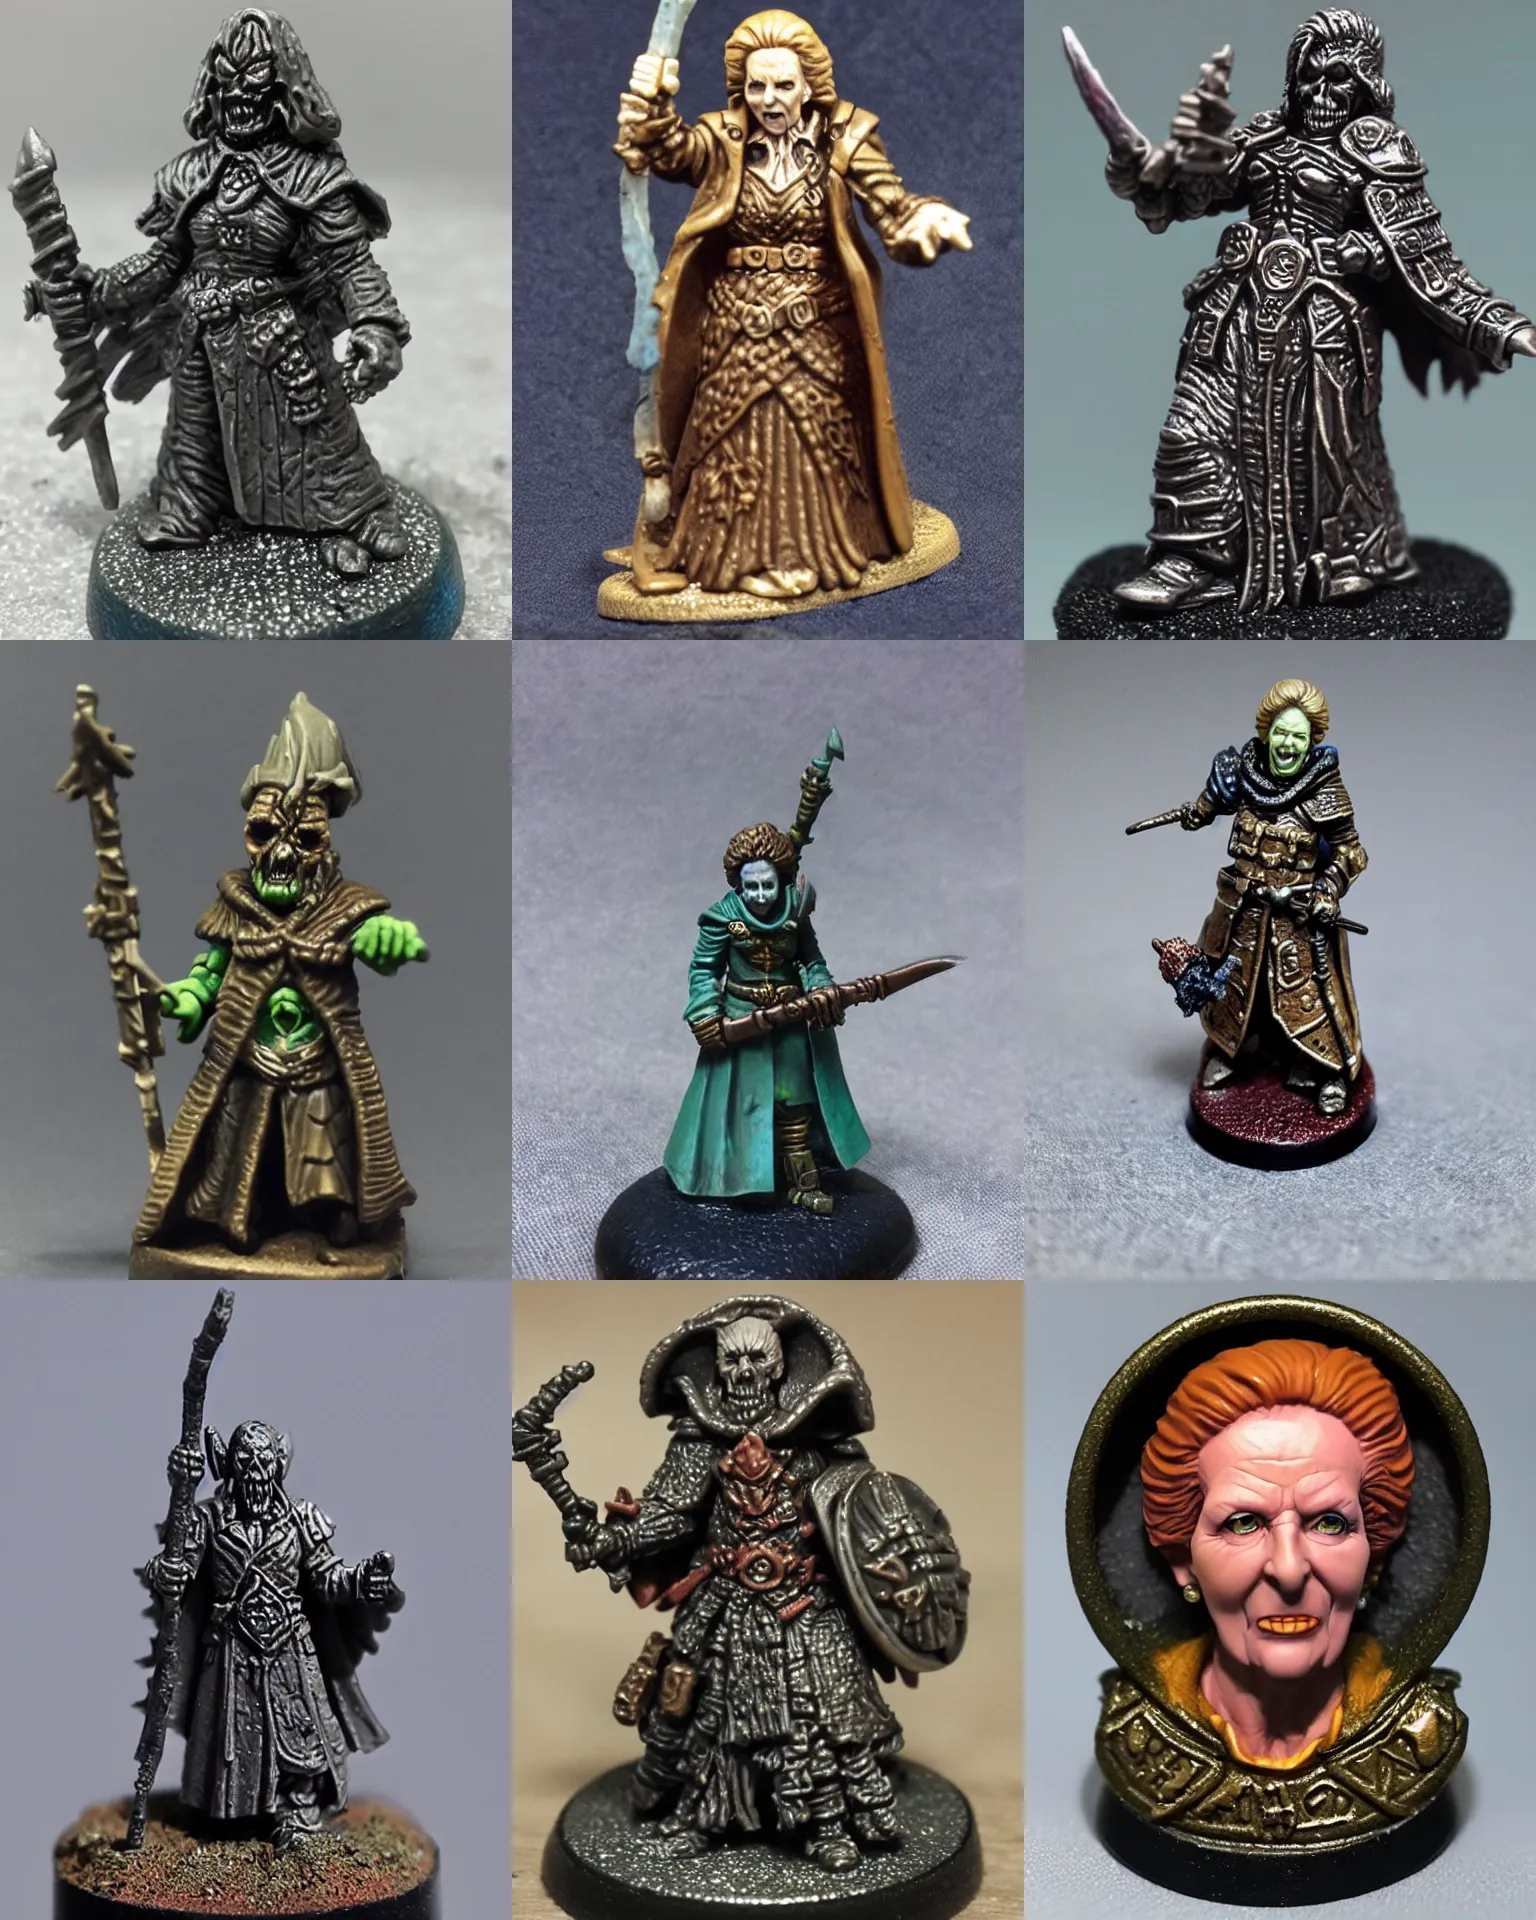 Prompt: resin miniature, margaret thatcher, 2 8 mm heroic scale, games workshop, lich, undead mage, round base, evil villain, citadel colour, glowing eyes, osl, nmm, r / paintedminis, ttrpg, dungeons and dragons